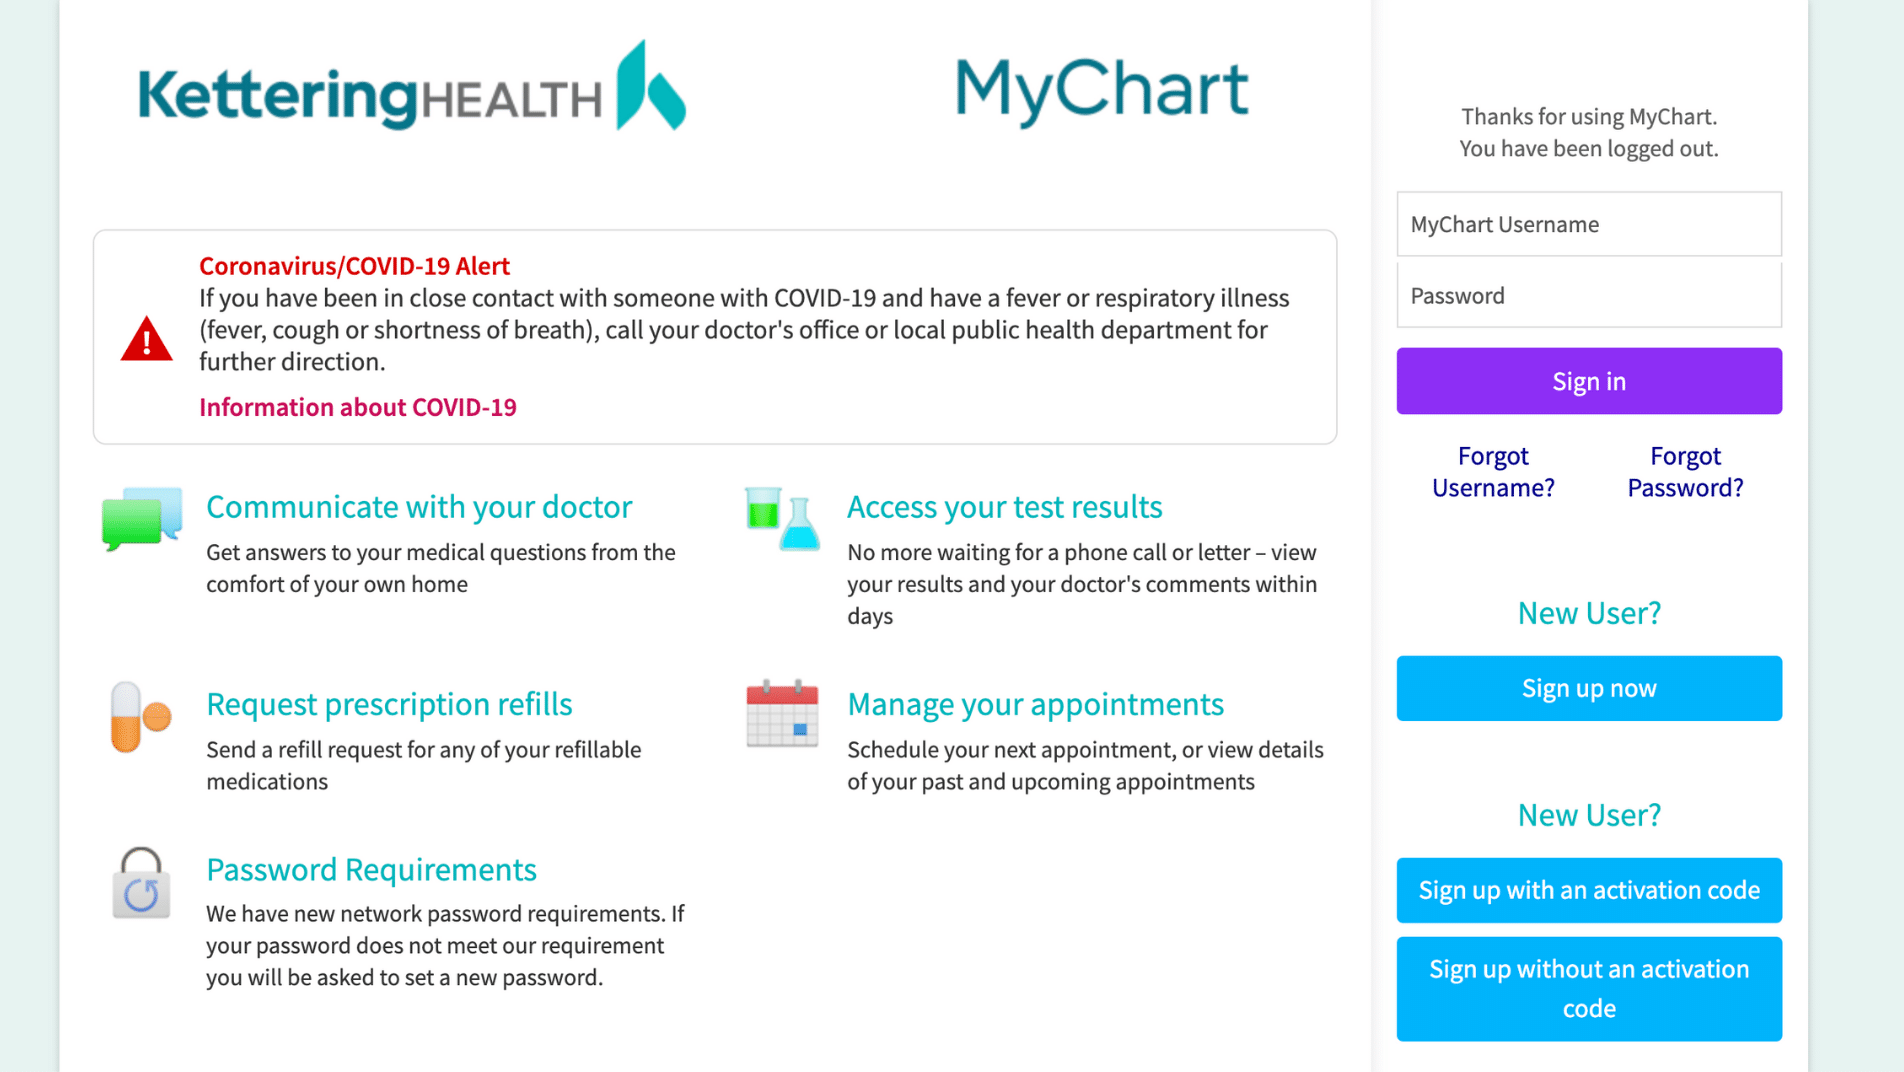 The login screen for mychart